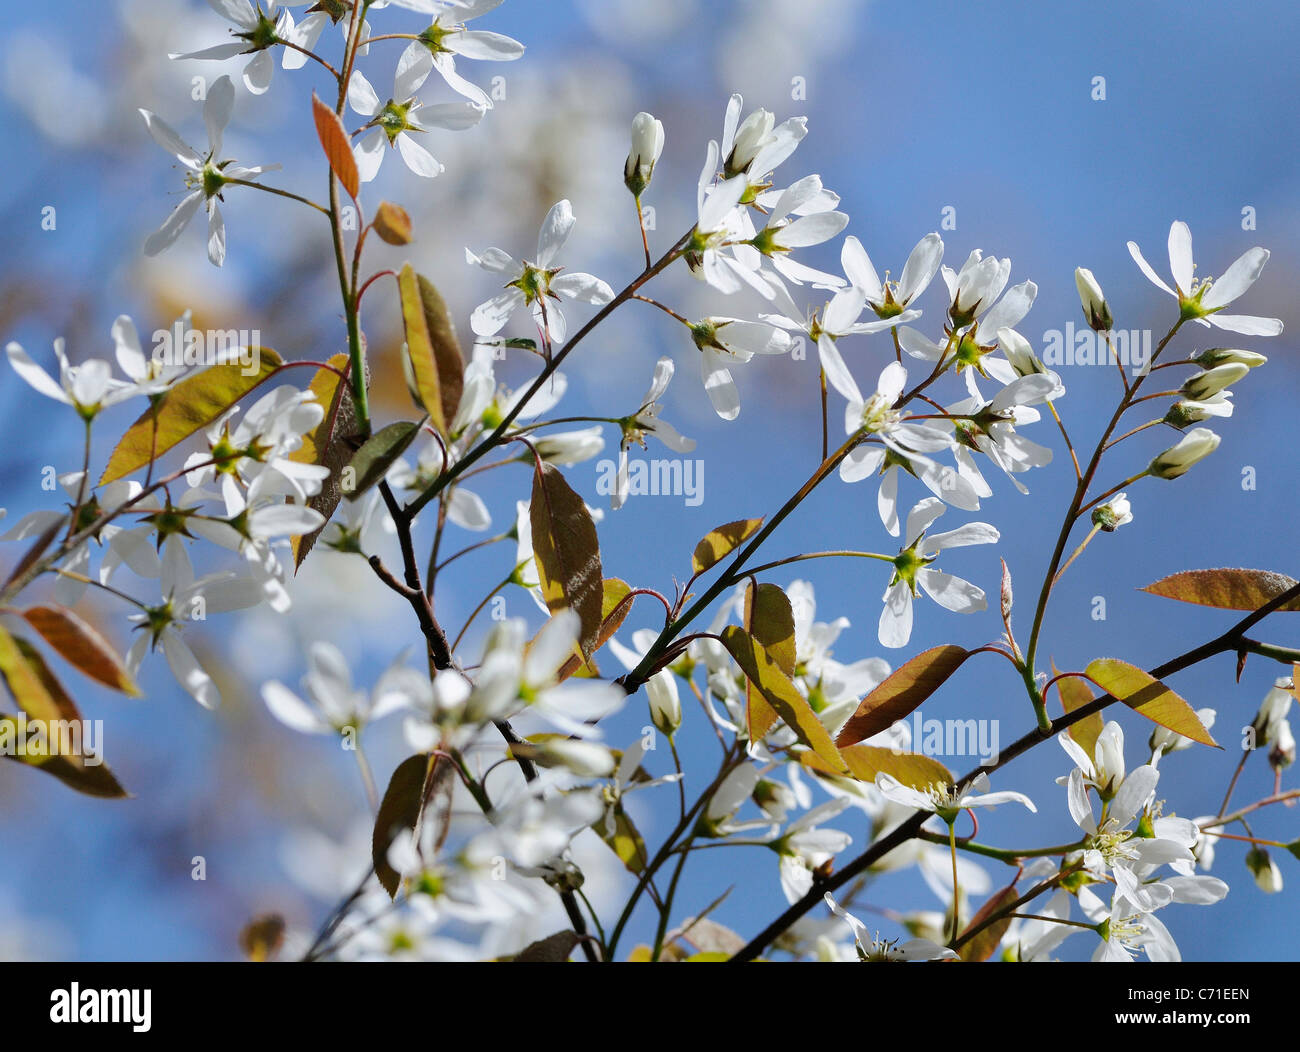 Amelanchier lamarckii Snowy mespilus White flowers on branches of deciduous tree against blue sky Stock Photo